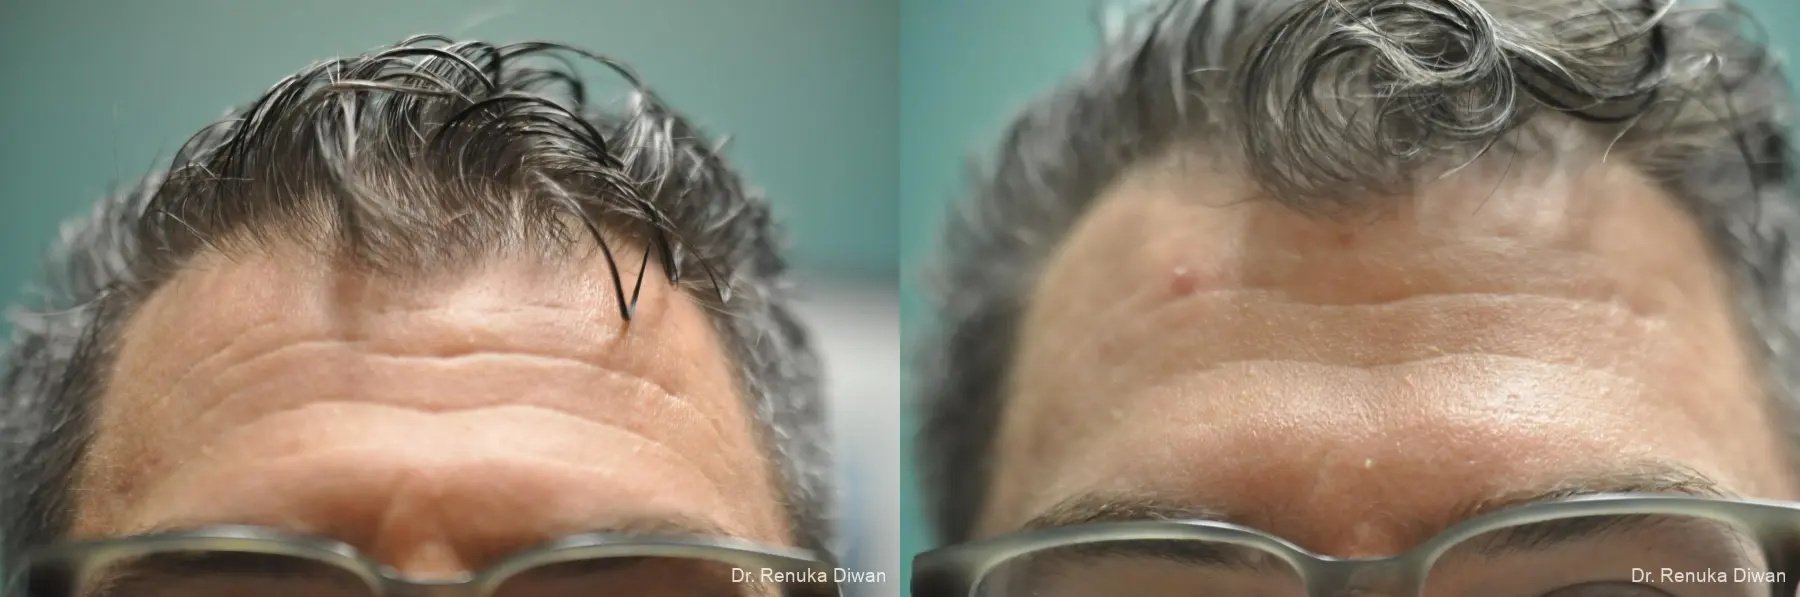 Botox Cosmetic For Men: Patient 7 - Before and After 1